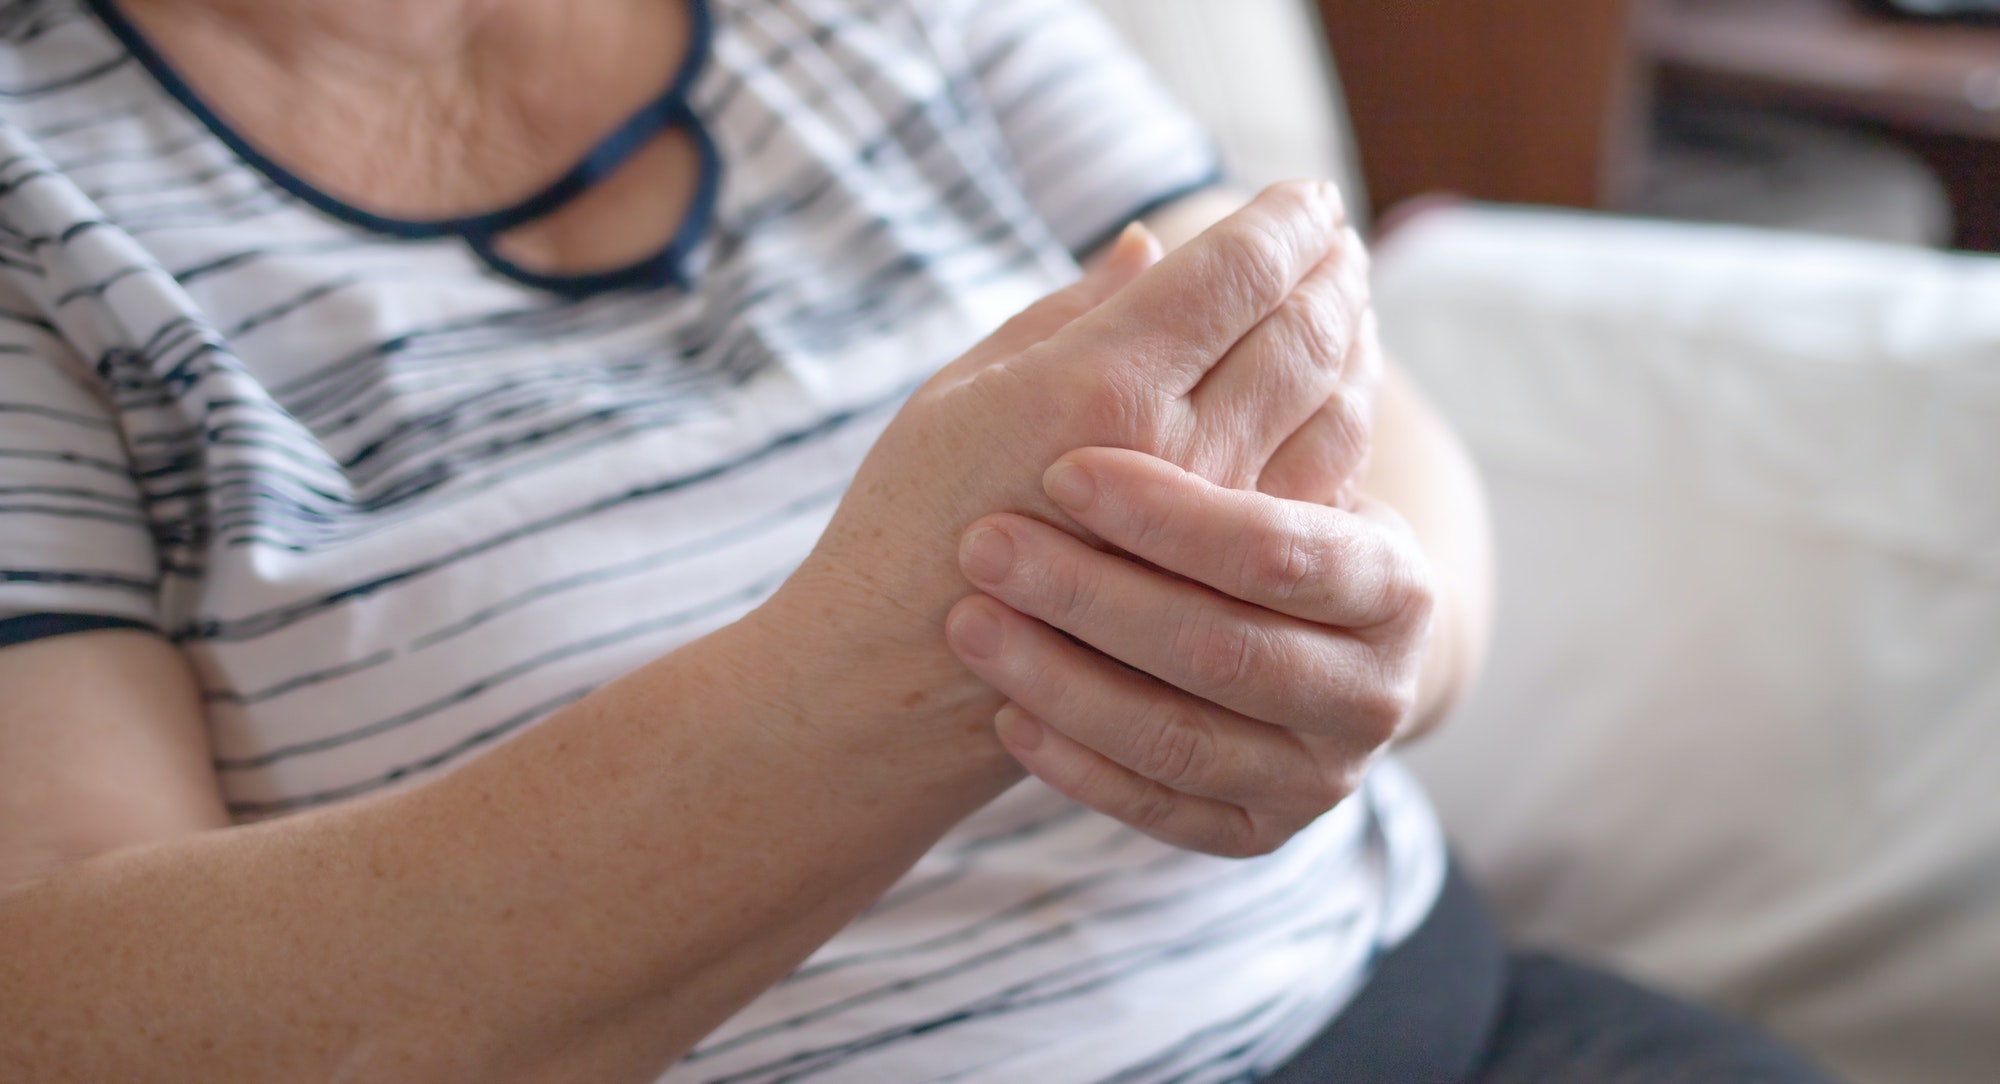 An elderly woman suffers from joint pain. the concept of medicine, the treatment of the disease